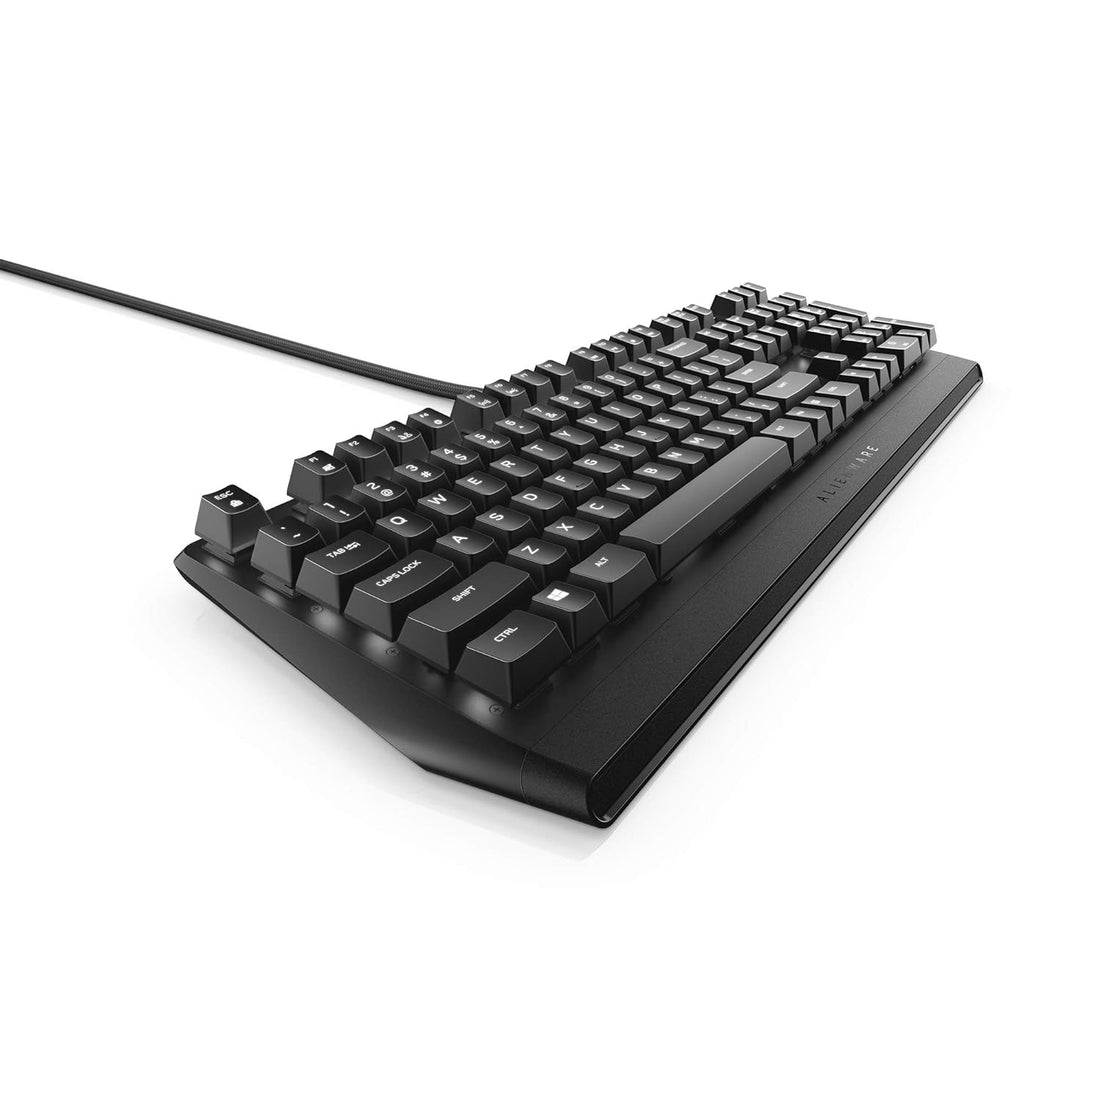 Alienware Mechanical Gaming Keyboard AW310K: Cherry MX Red Switches - Nkro - Per-Key White LED - USB Passthrough & Media Control - 5 Onboard Profiles